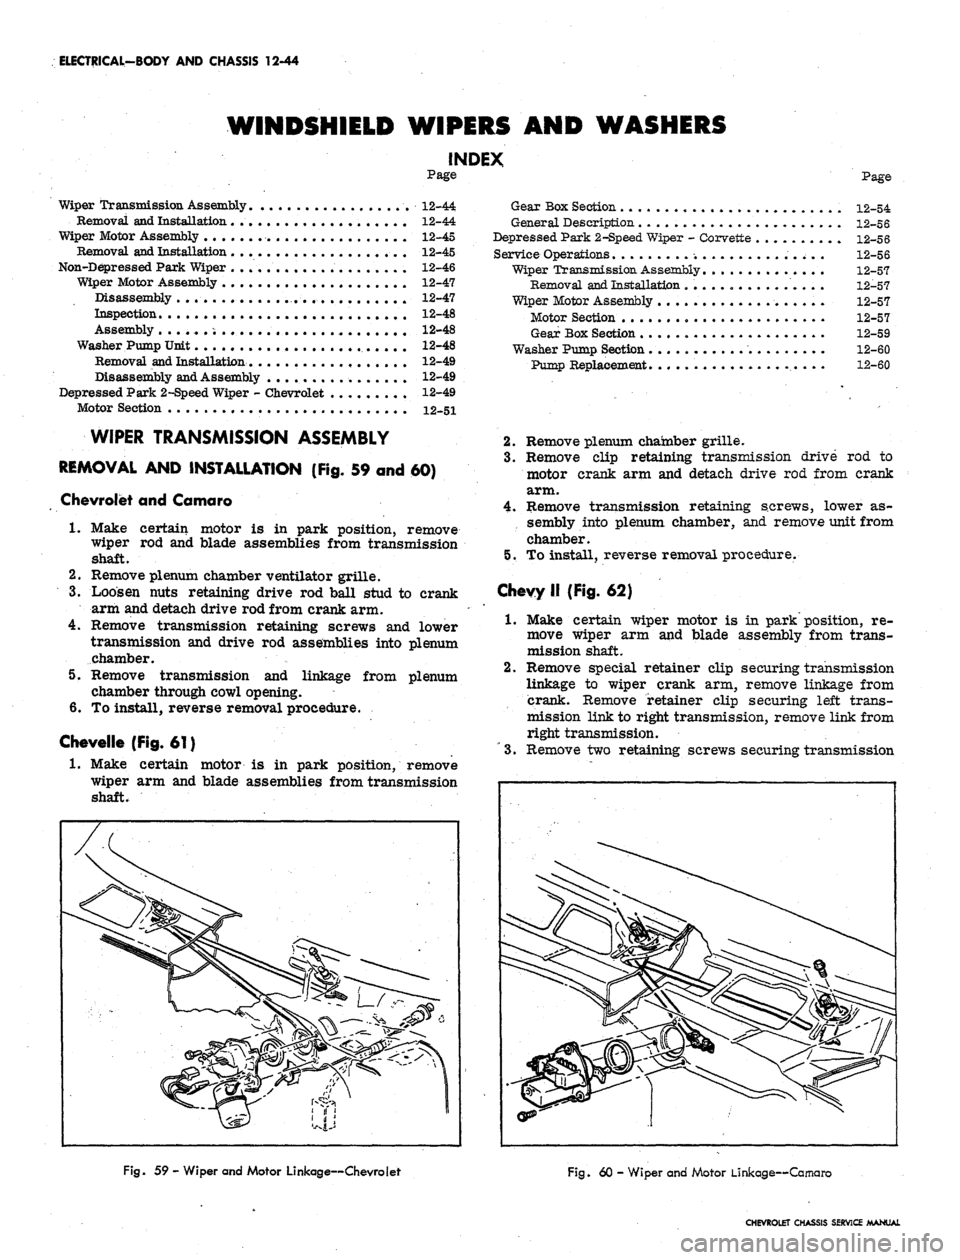 CHEVROLET CAMARO 1967 1.G Chassis Workshop Manual 
ELECTRICAL-BODY AND CHASSIS 12-44

WINDSHIELD WIPERS AND WASHERS

INDEX

Page

Wiper Transmission Assembly 12-44

Removal and Installation 12-44

Wiper Motor Assembly . 12-45

Removal and Installatio